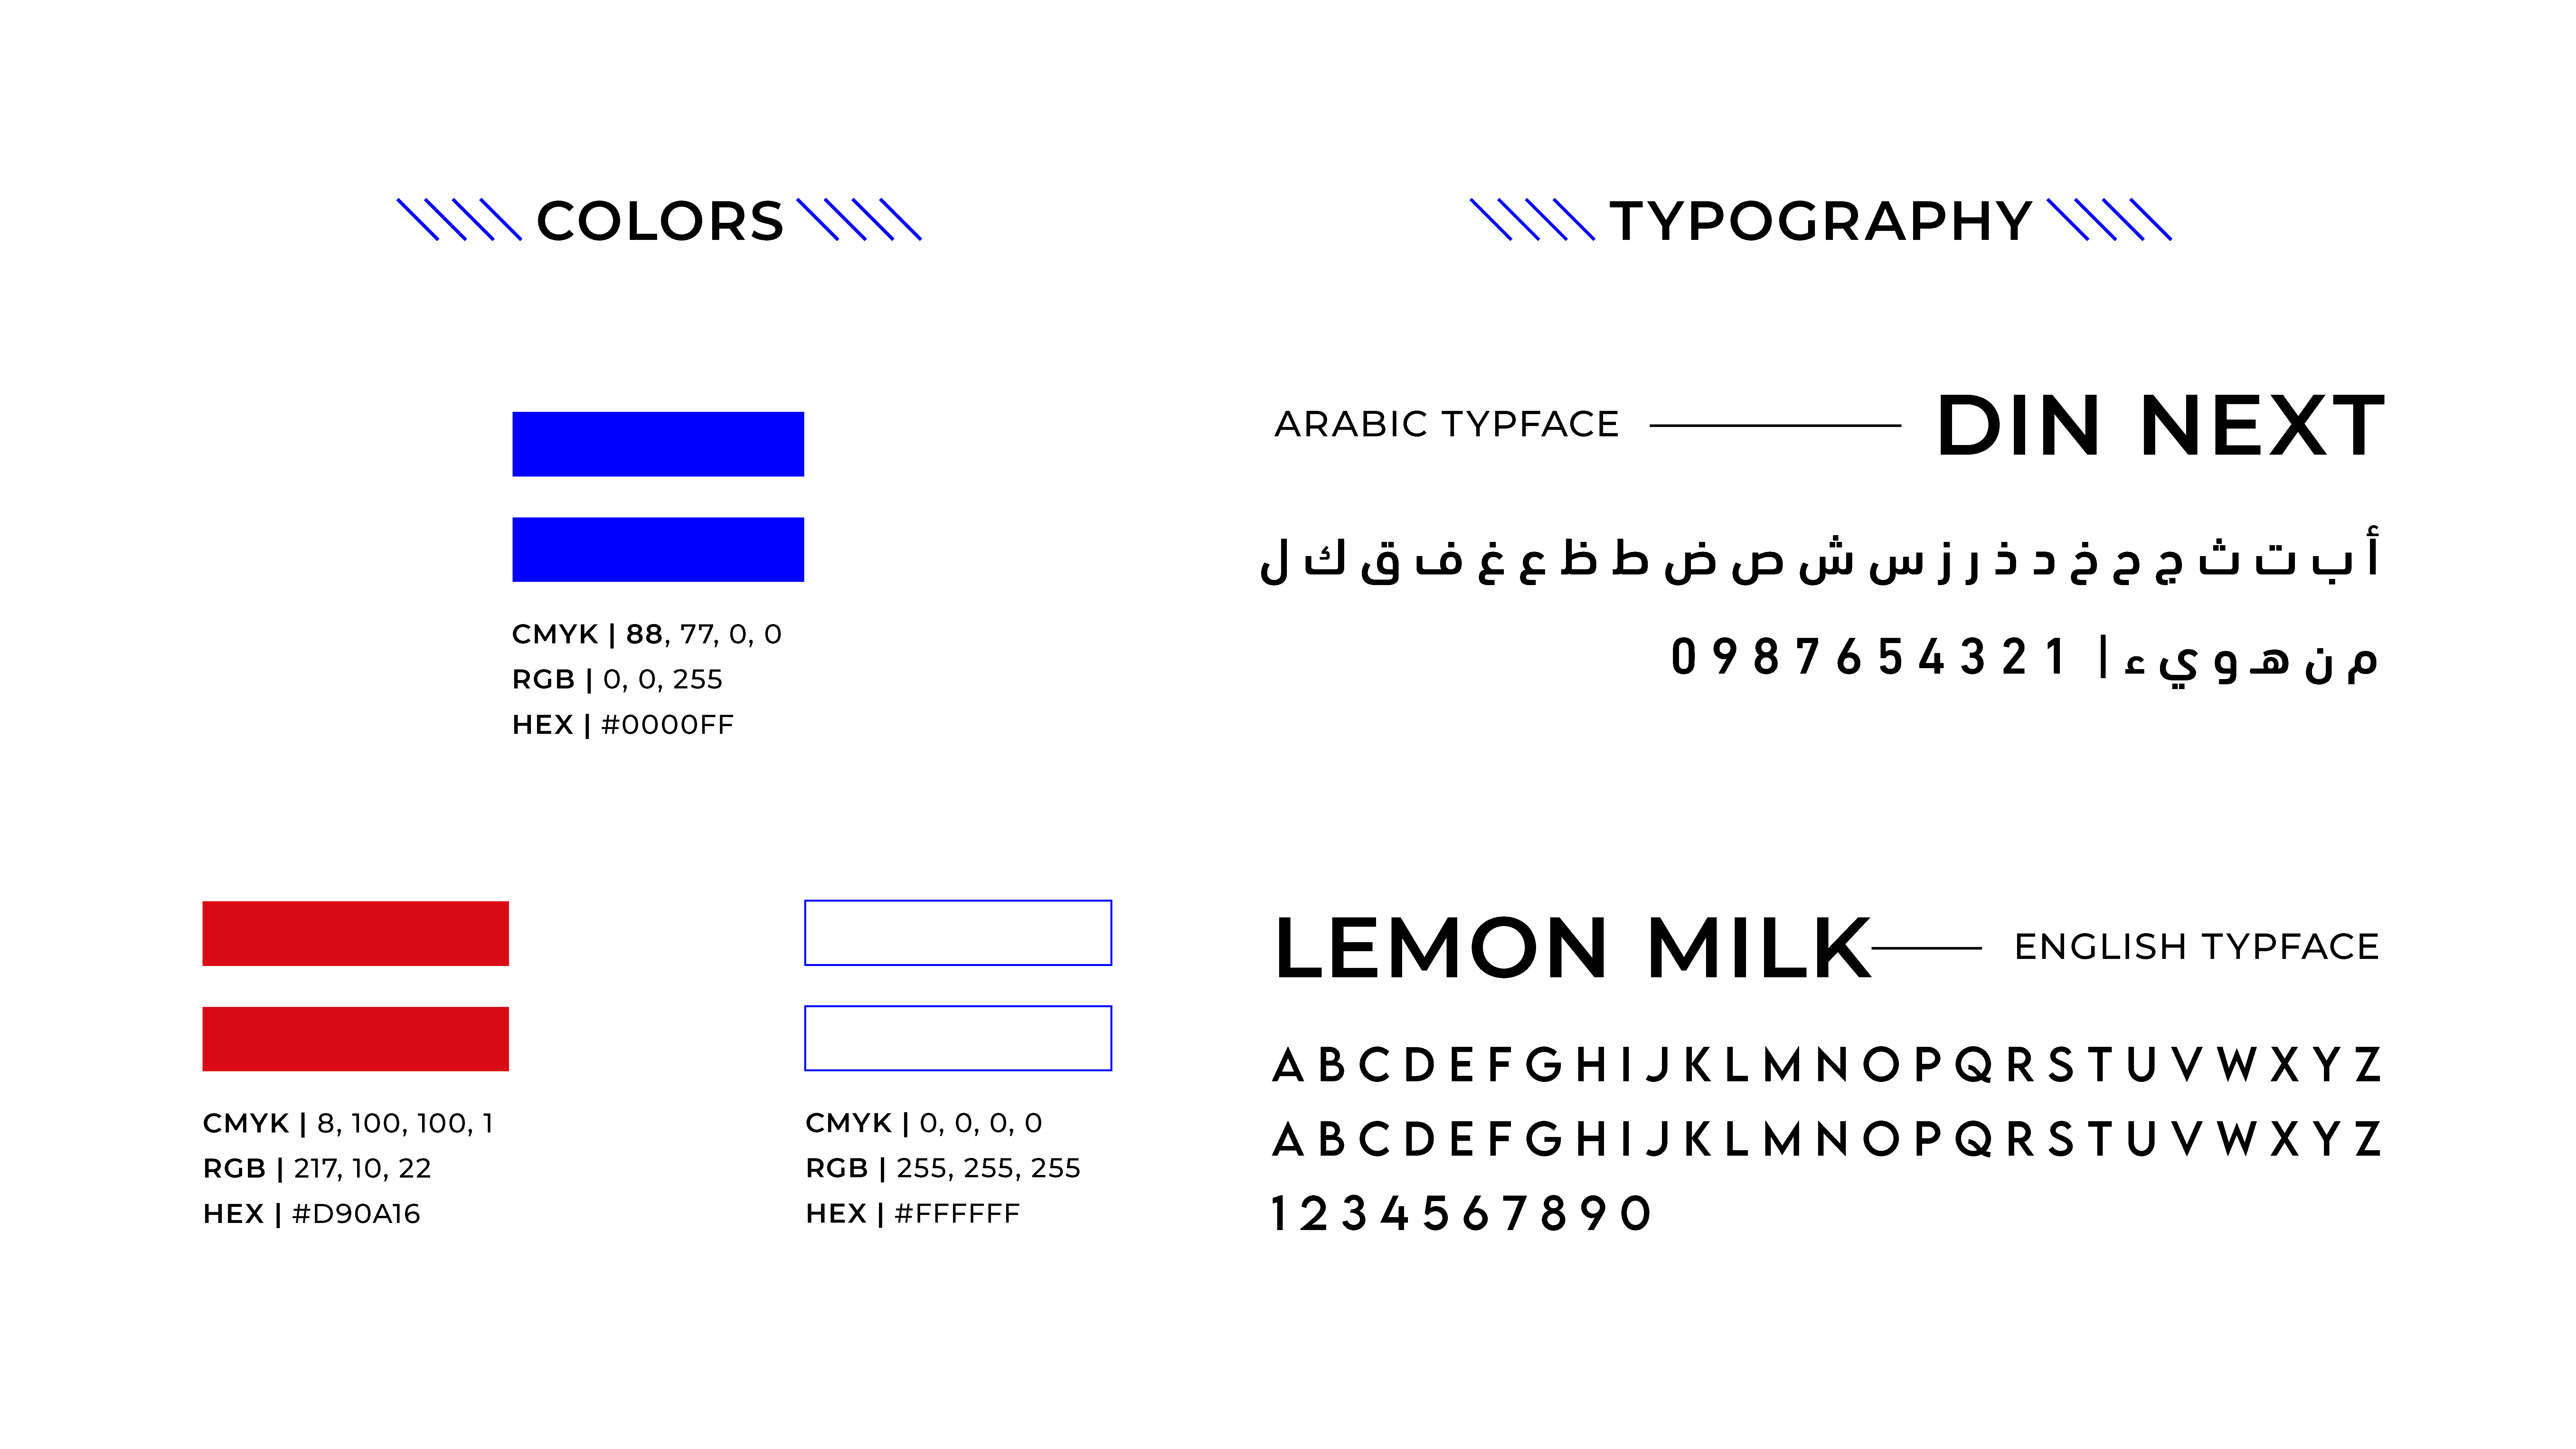 EQUAL COLORS AND TYPOGRAPHY